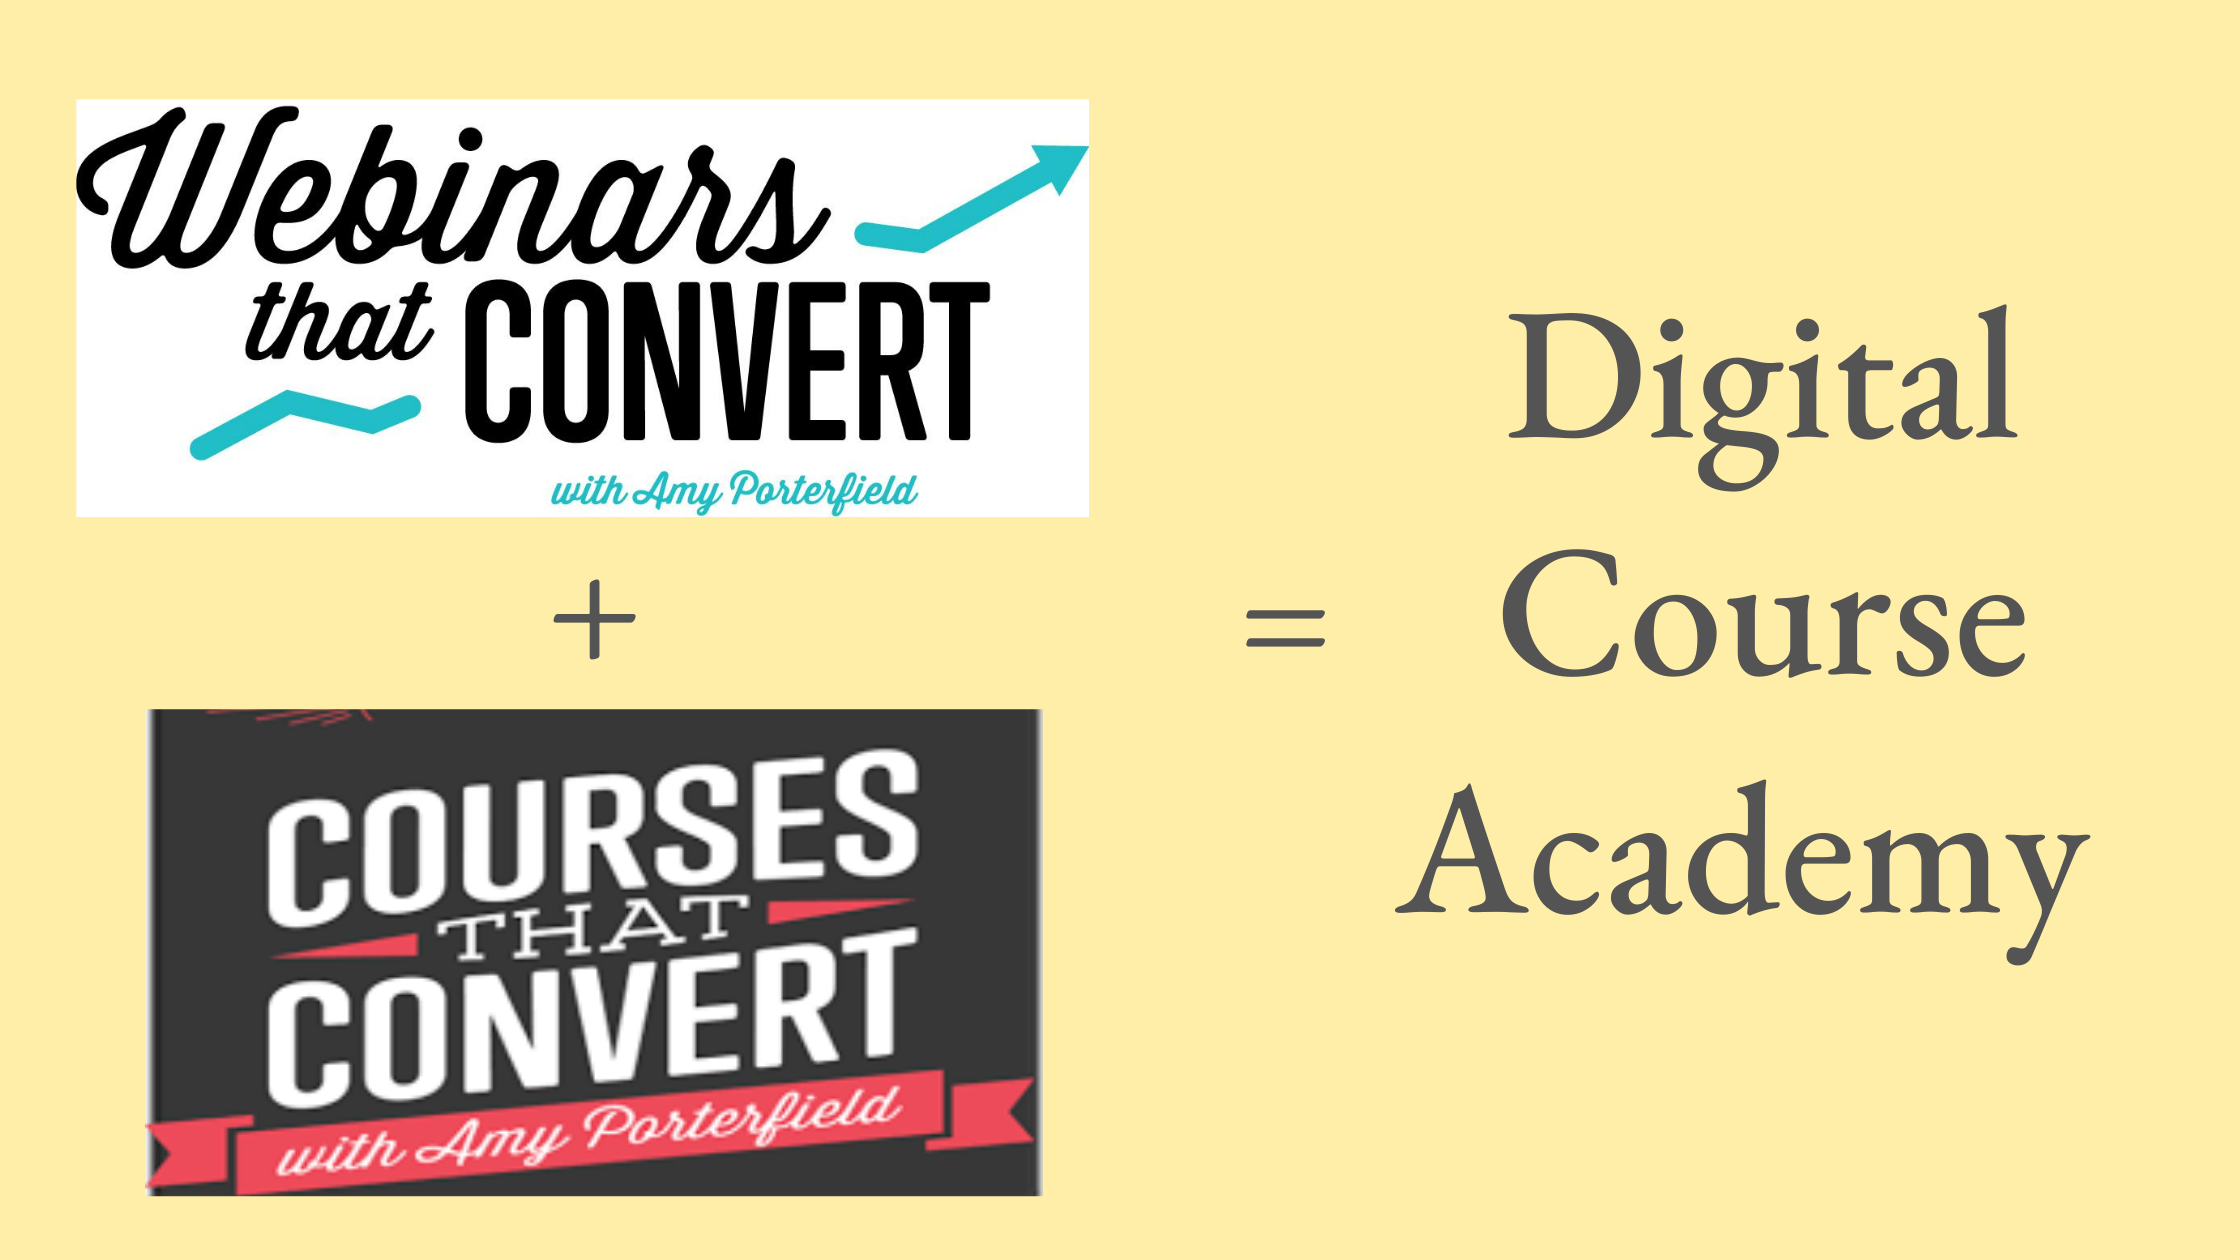 Digital Course Academy is Webinars that Convert and Courses that Convert in one program